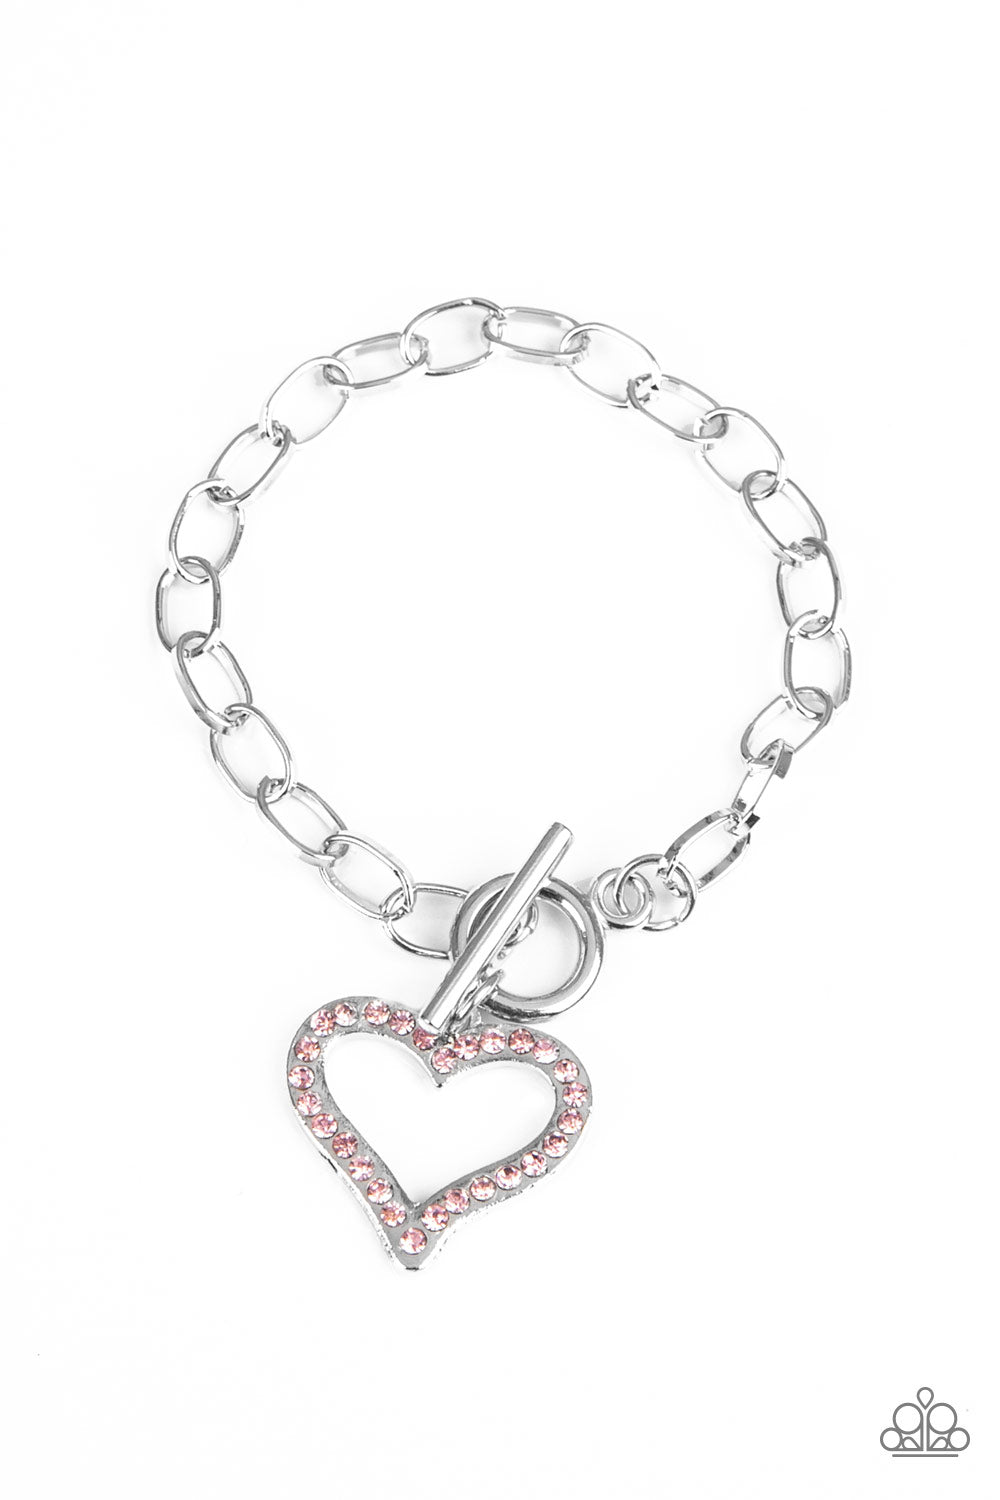 MARCH TO A DIFFERENT HEARTBEAT - PINK RHINESTONES HEART CHARM TOGGLE BRACELET